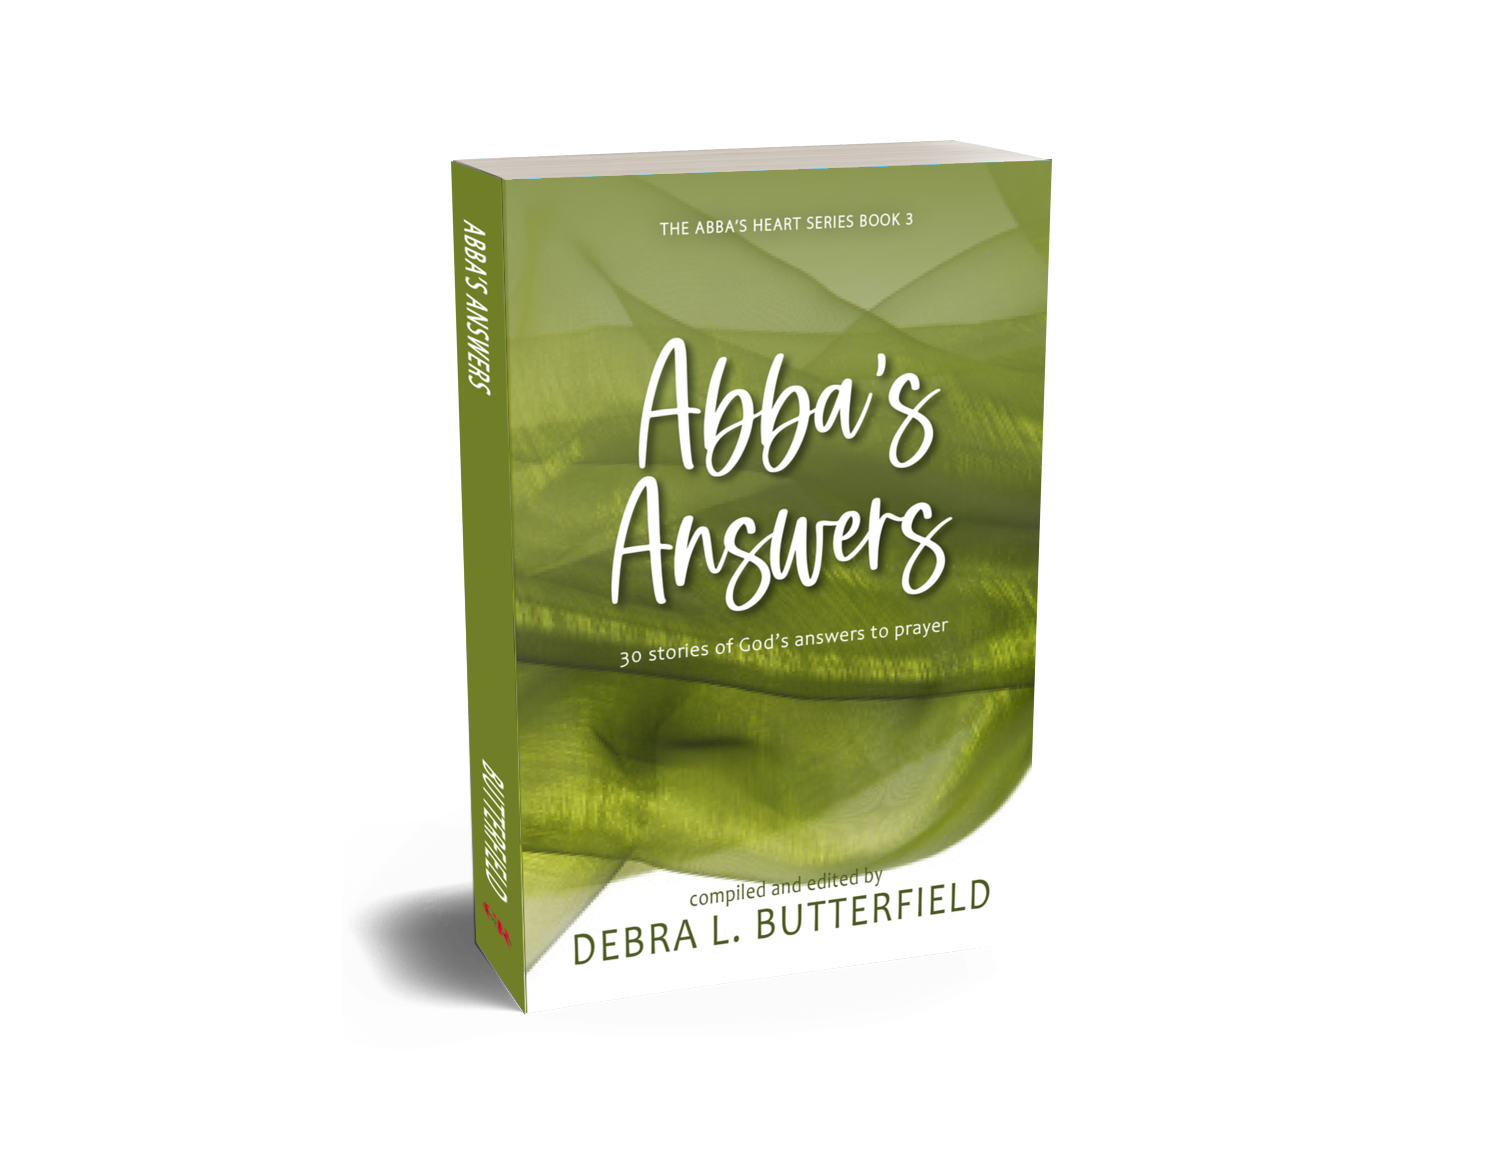 Abba's Answers devotional from Christian publisher CrossRiver Media